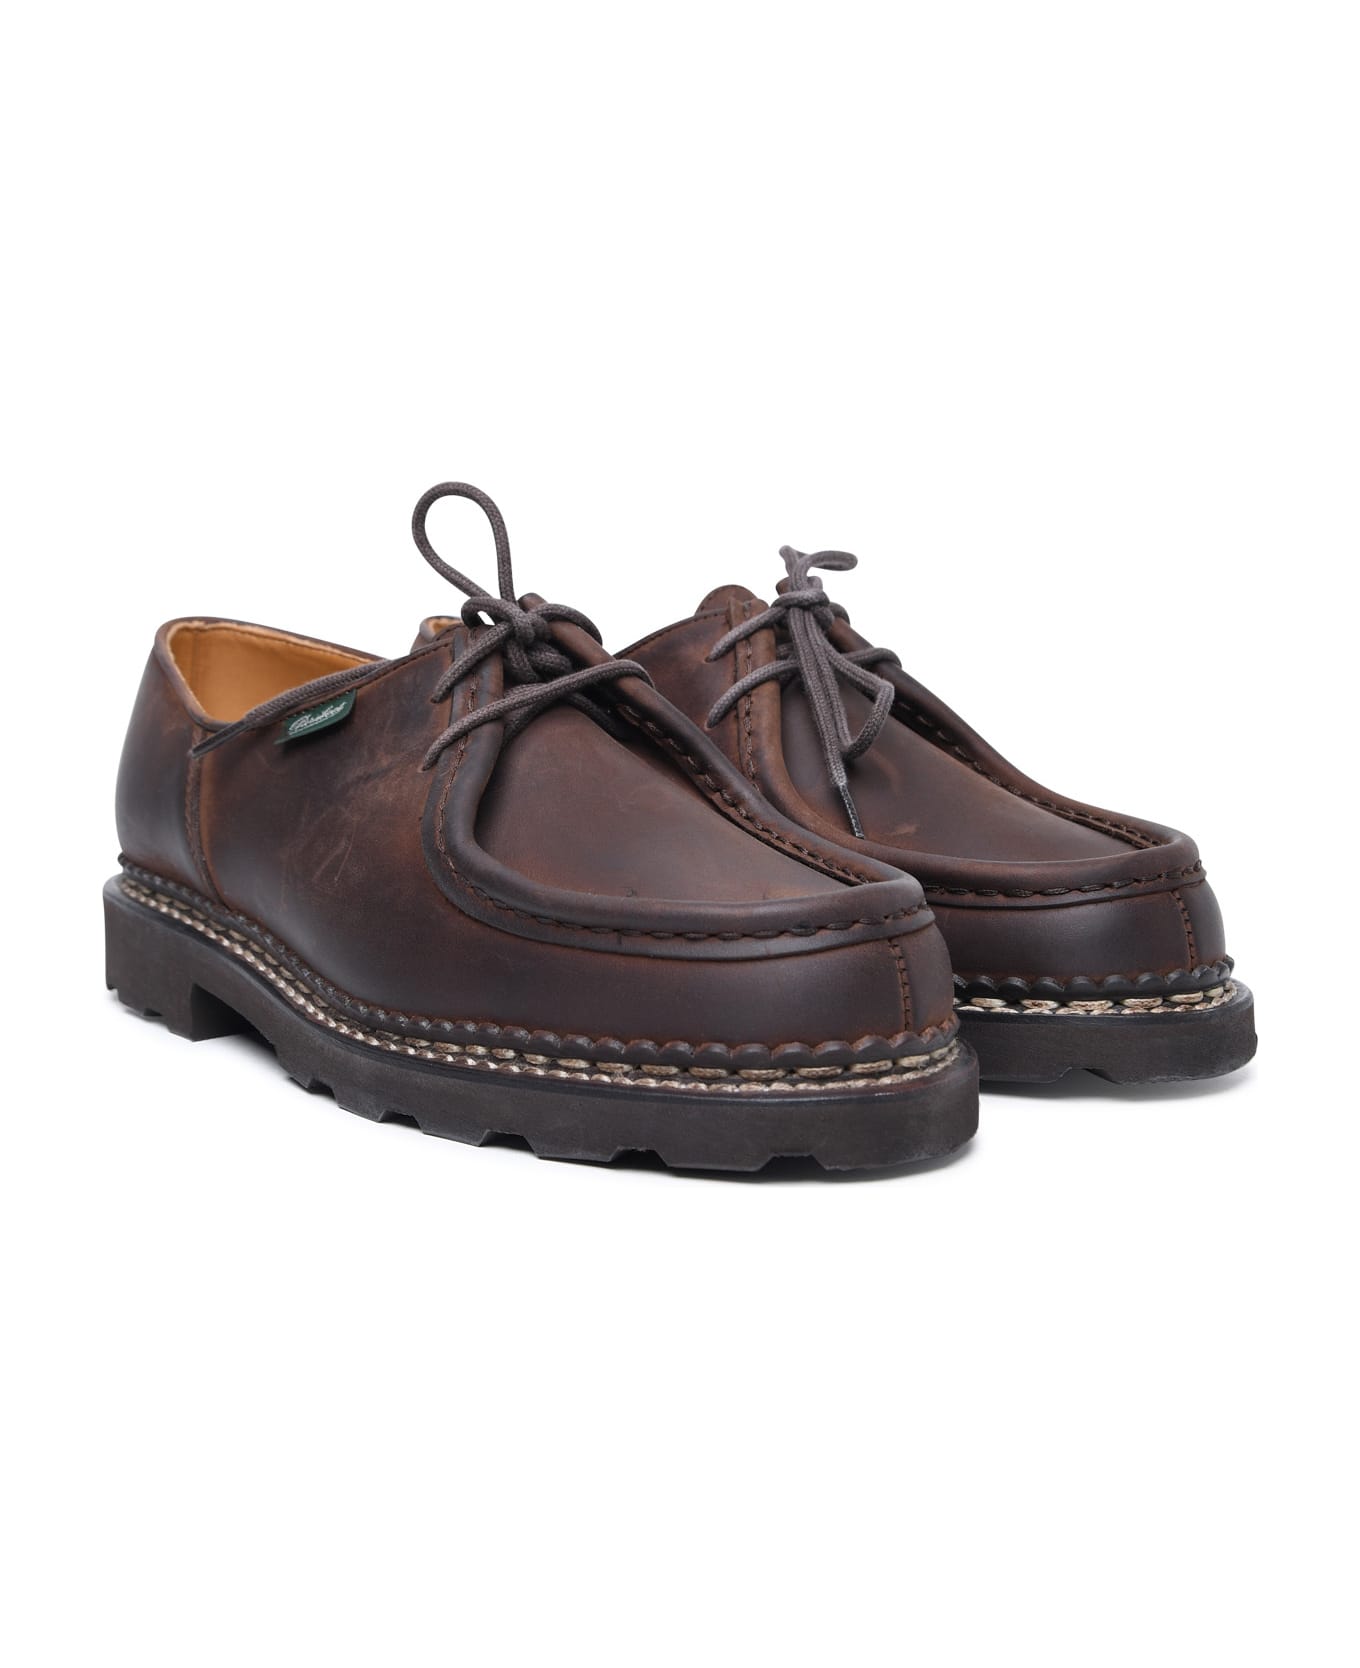 Paraboot 'michael' Brown Leather Derby Shoes - Brown